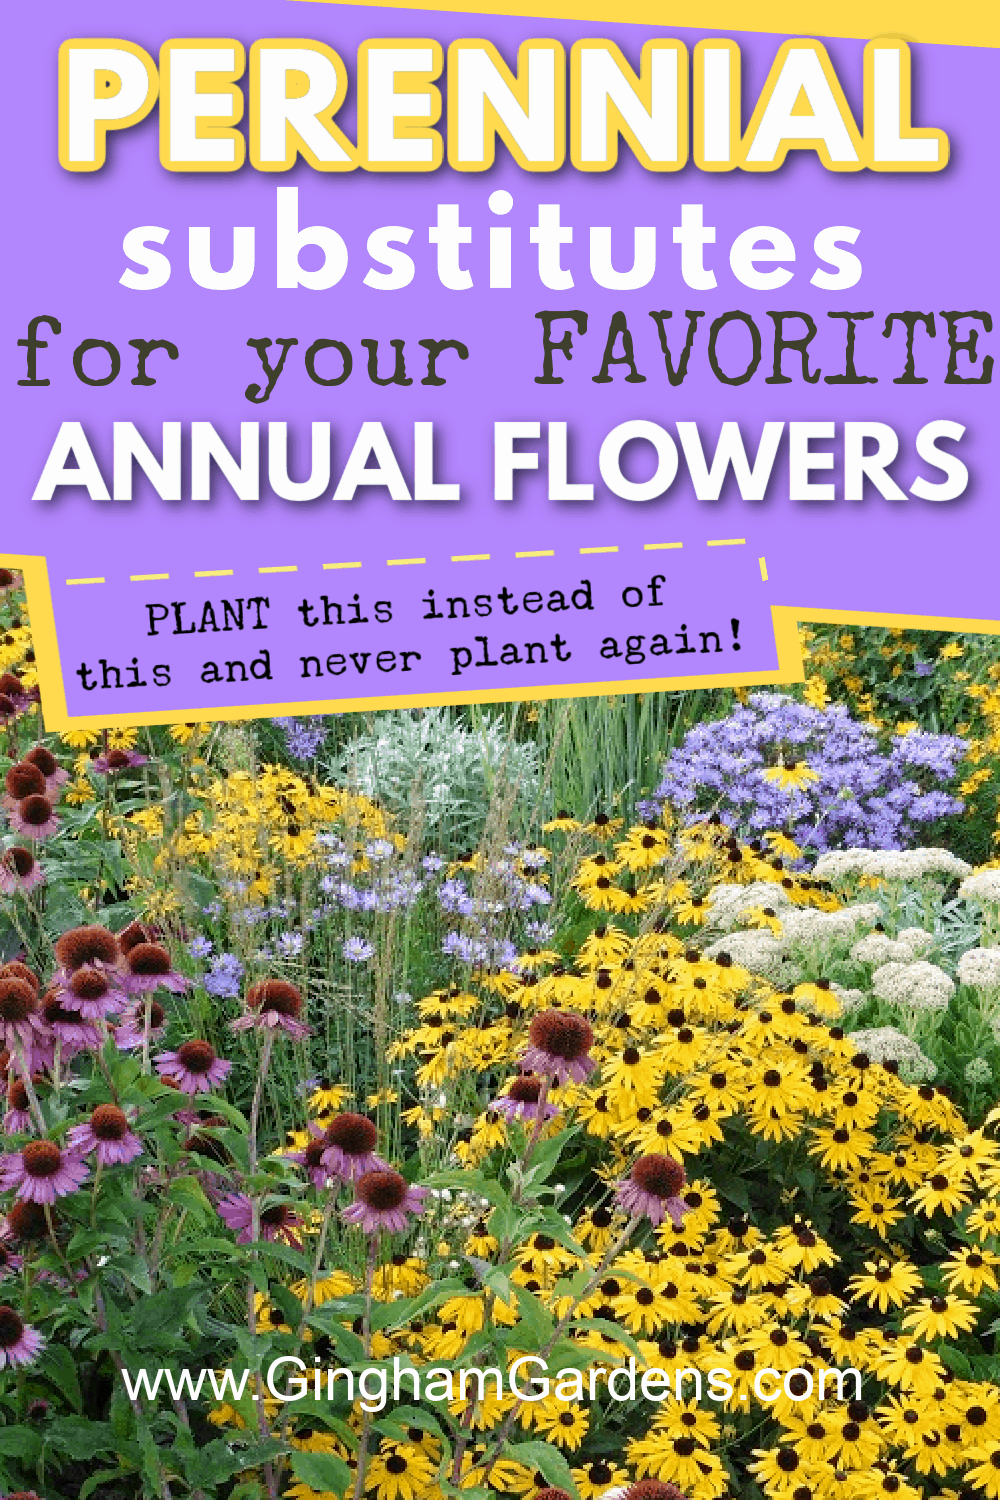 Image of a Flower Garden with text overlay - Perennial substitutes for your favorite annual flowers